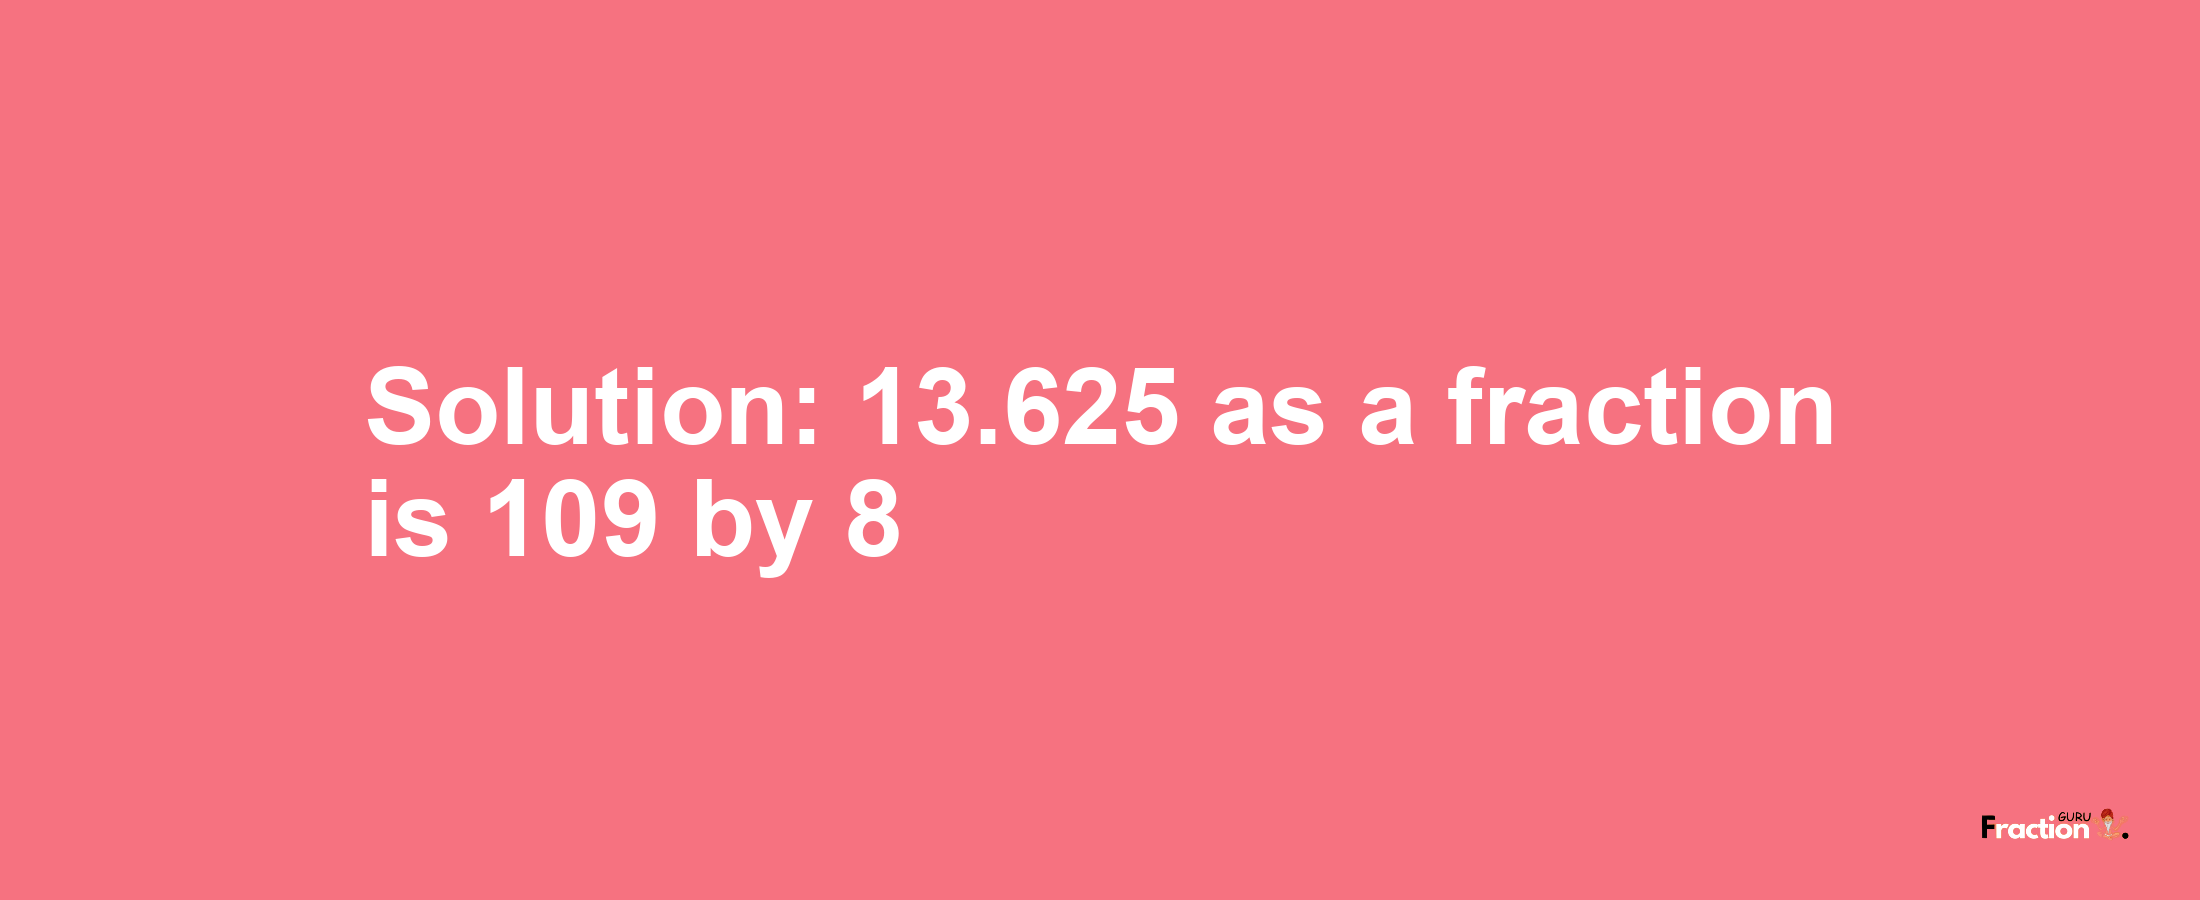 Solution:13.625 as a fraction is 109/8